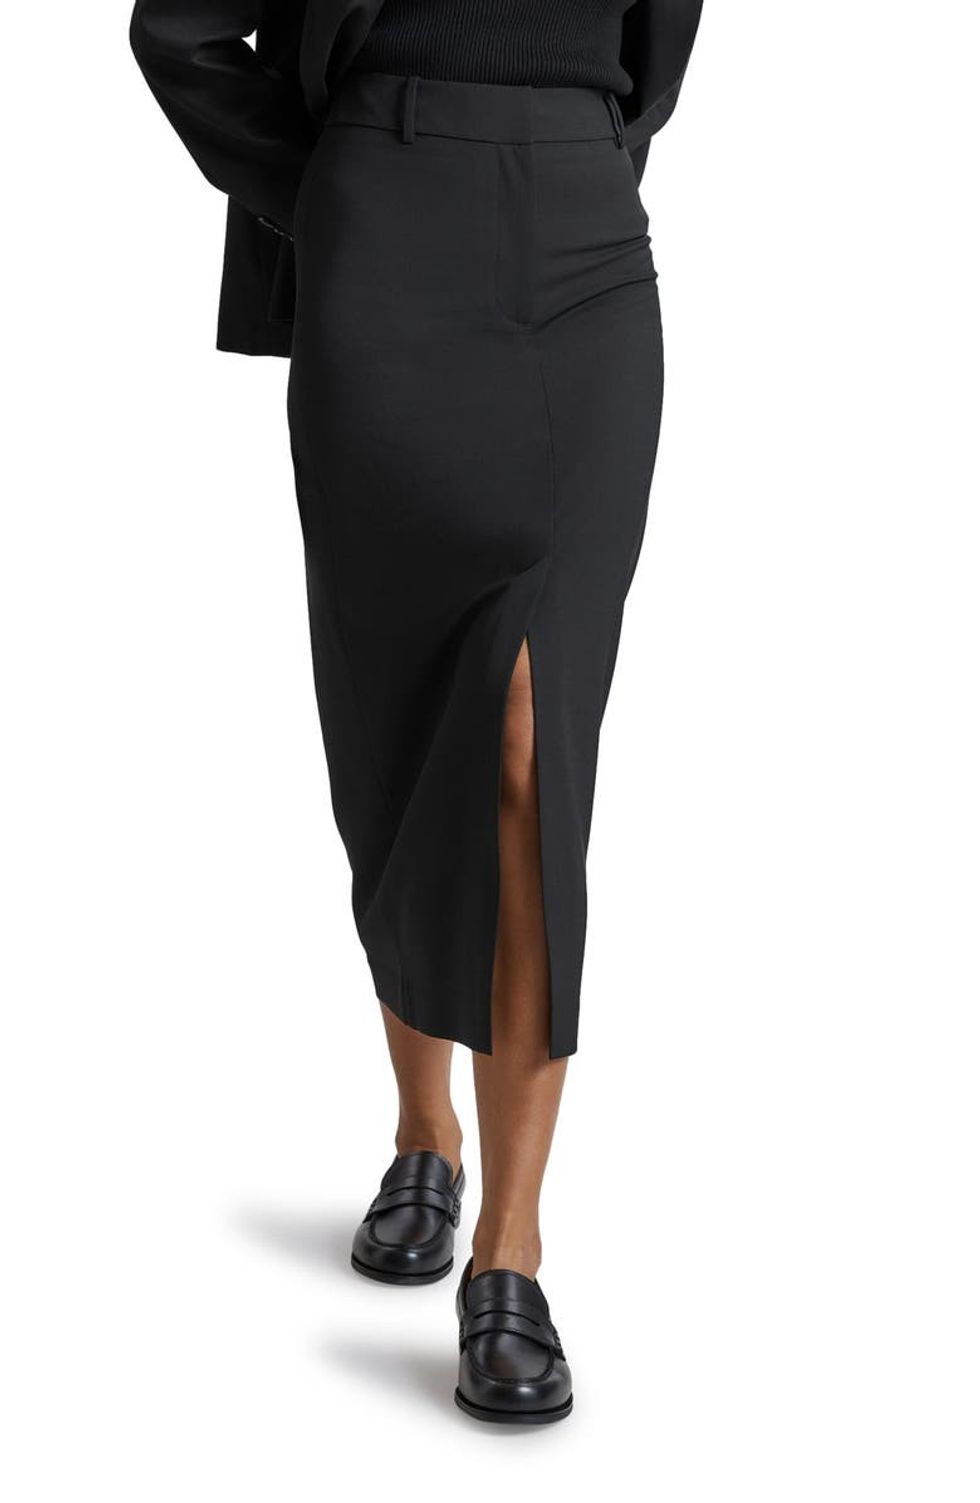 & Other Stories Wool Blend Midi Pencil Skirt